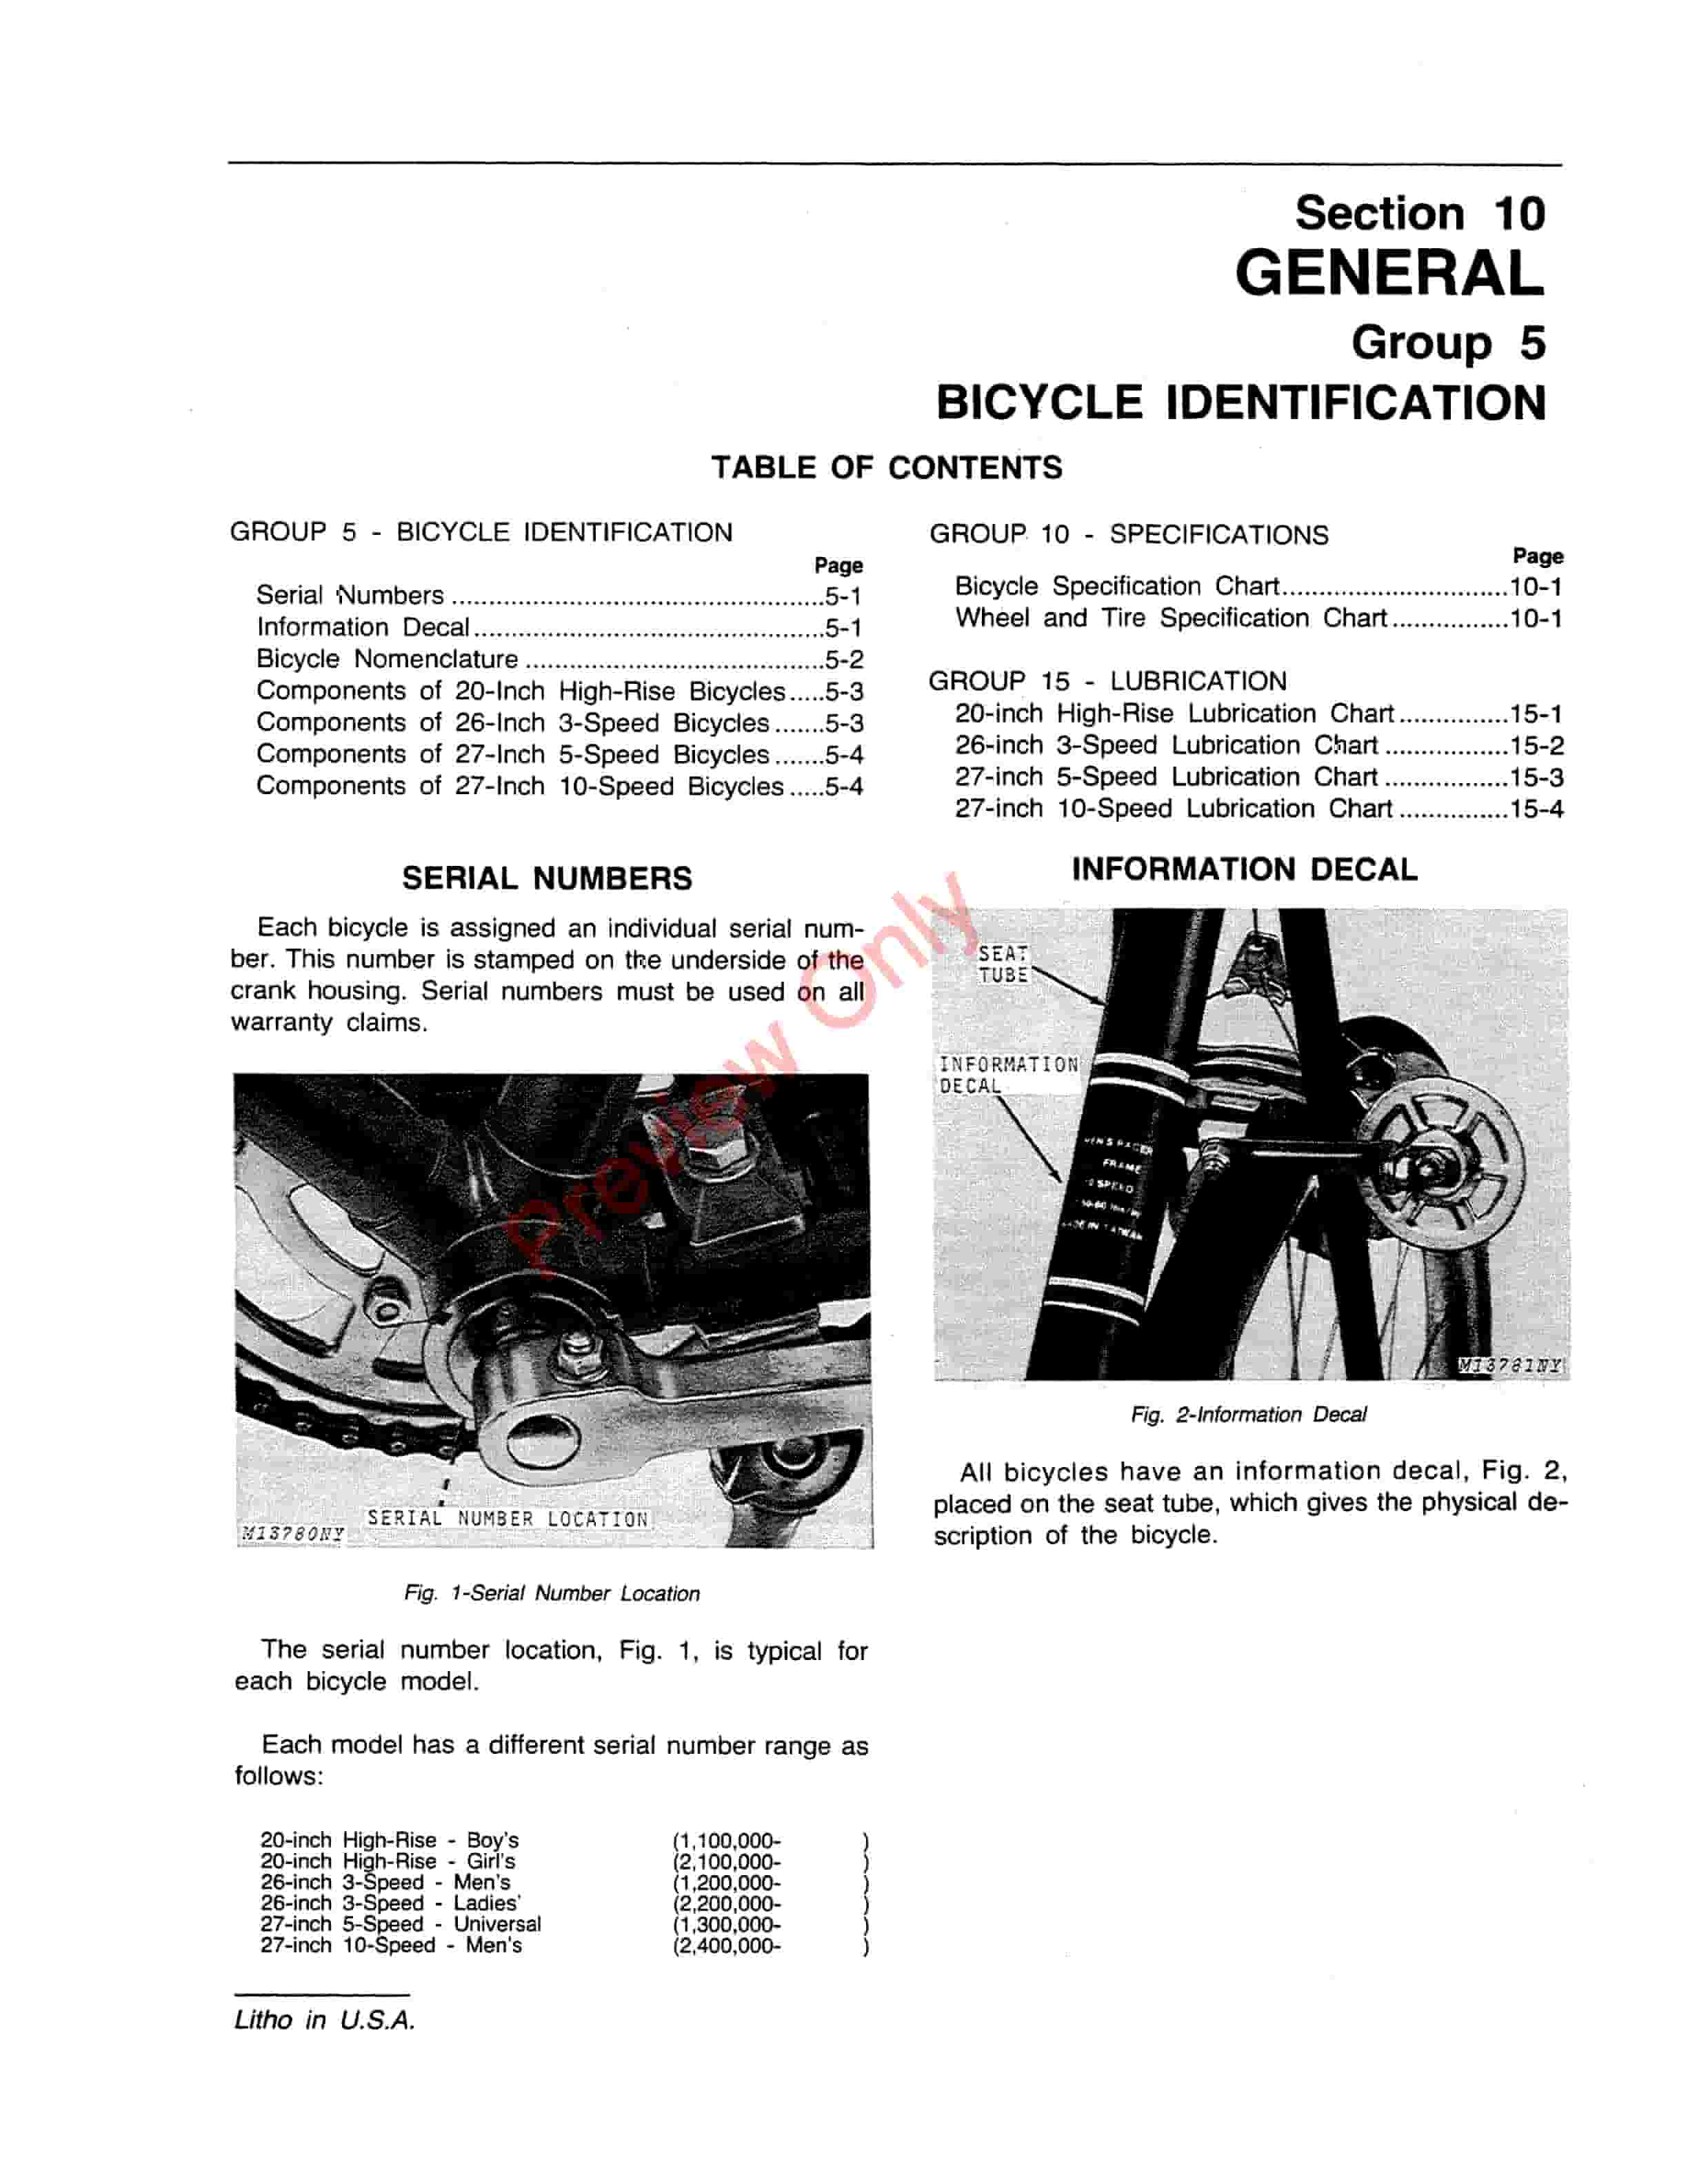 John Deere 20 Inch High Rise 3 Speed 5 Speed And 10 Speed Bicycles Service Manual SM2099 01FEB74 5